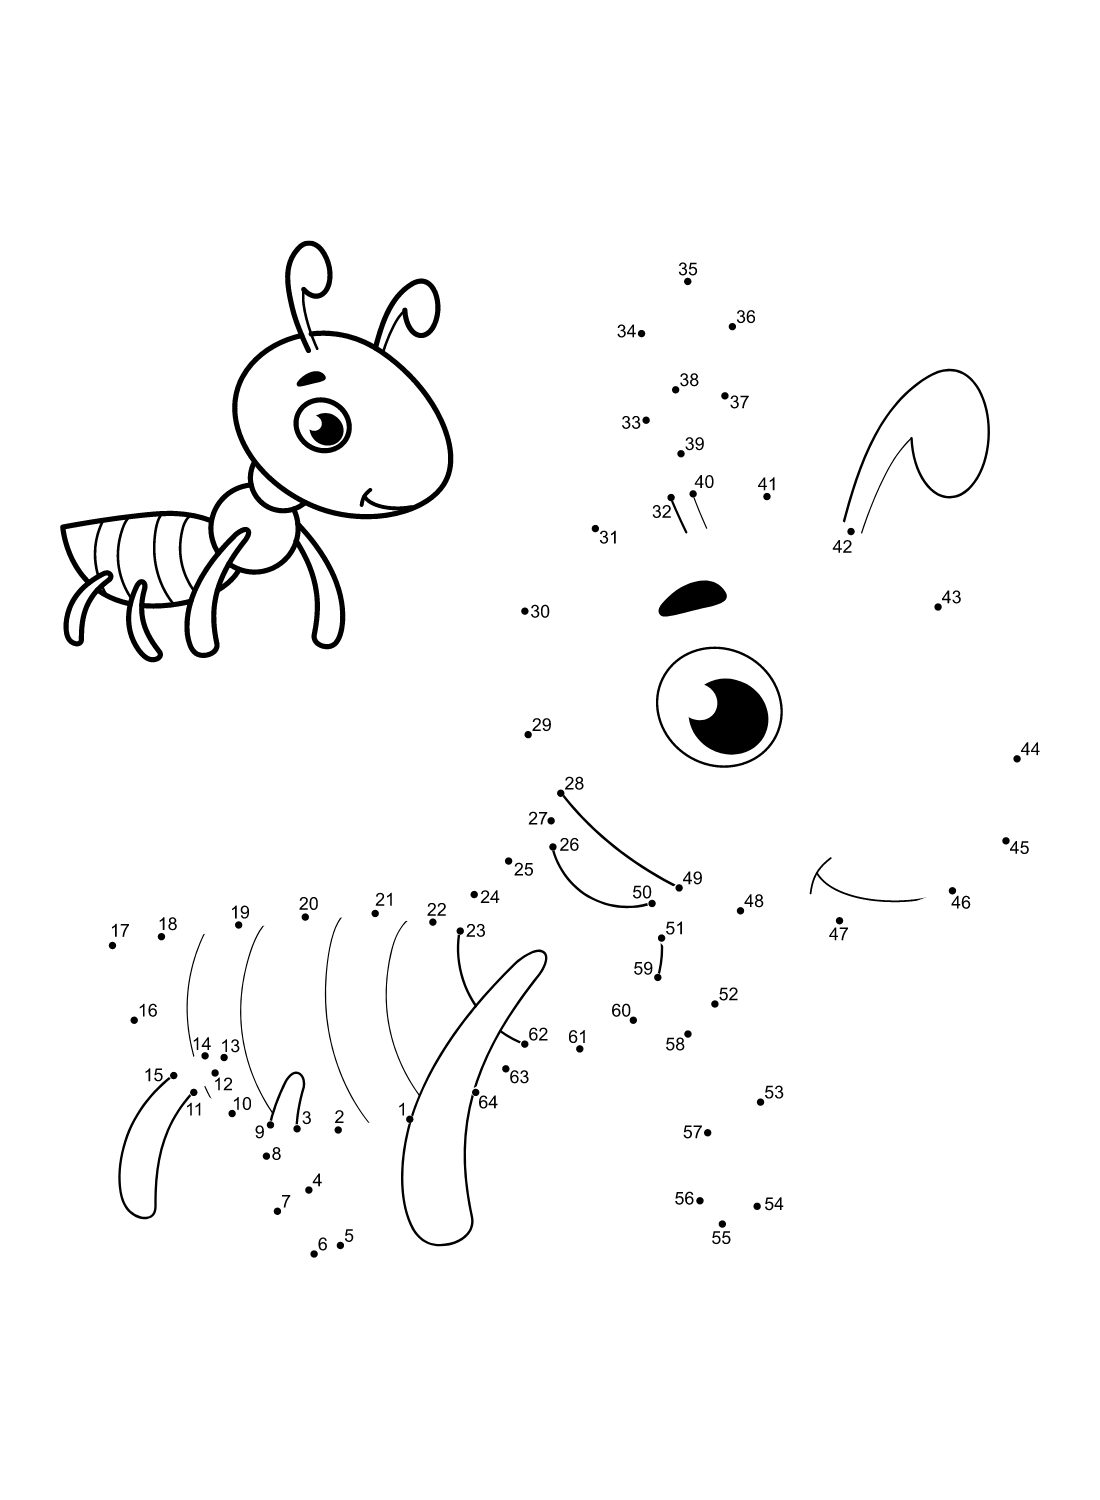 Ants Dot to Dot Coloring Page